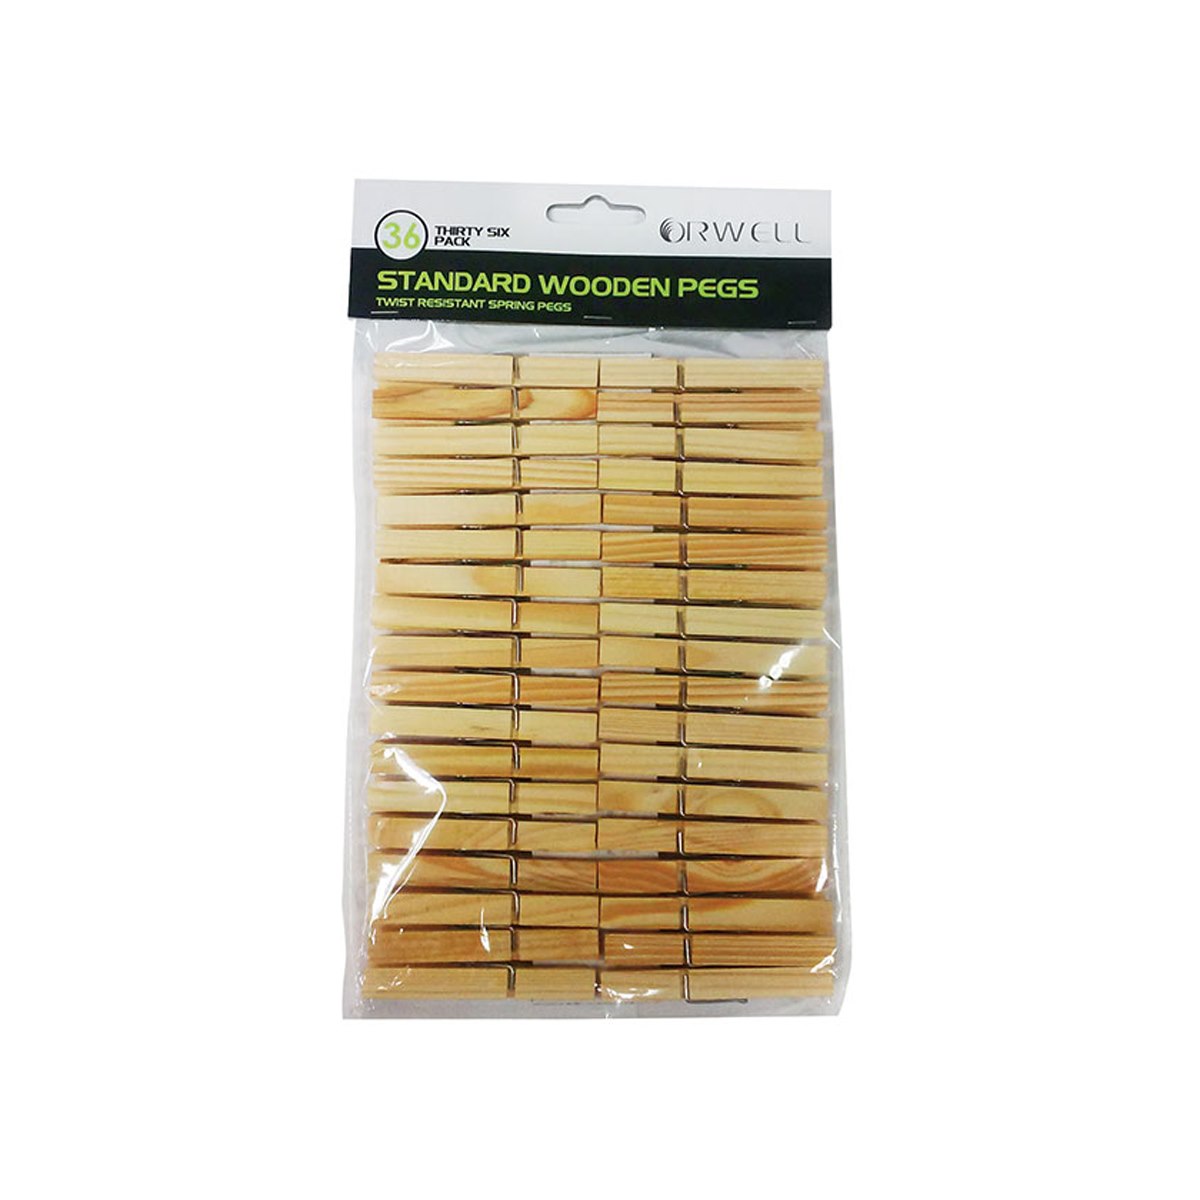 Orwell Wooden Clothes Pegs 36 Pack